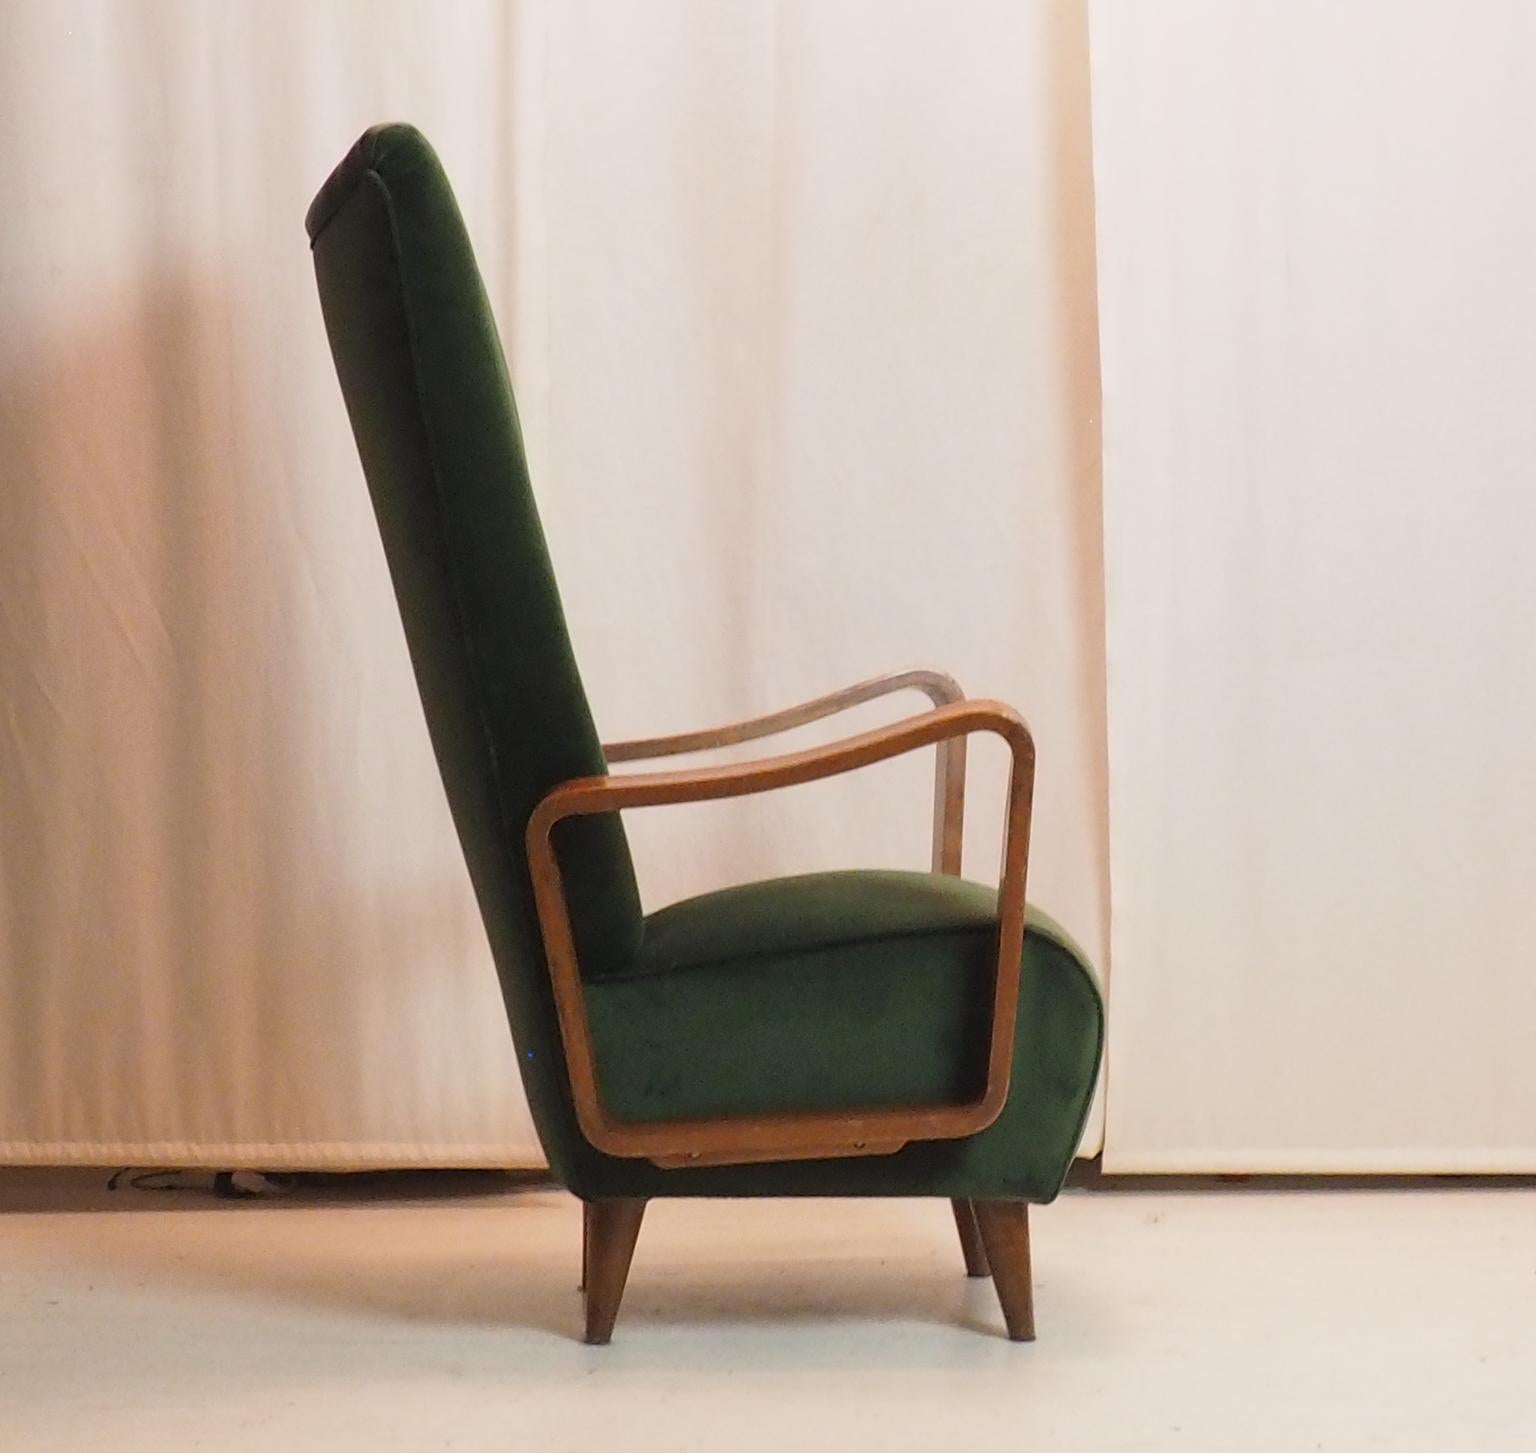 Midcentury High Back Italian Green Armchairs by Pietro Lingeri, Italy, 1950s For Sale 5